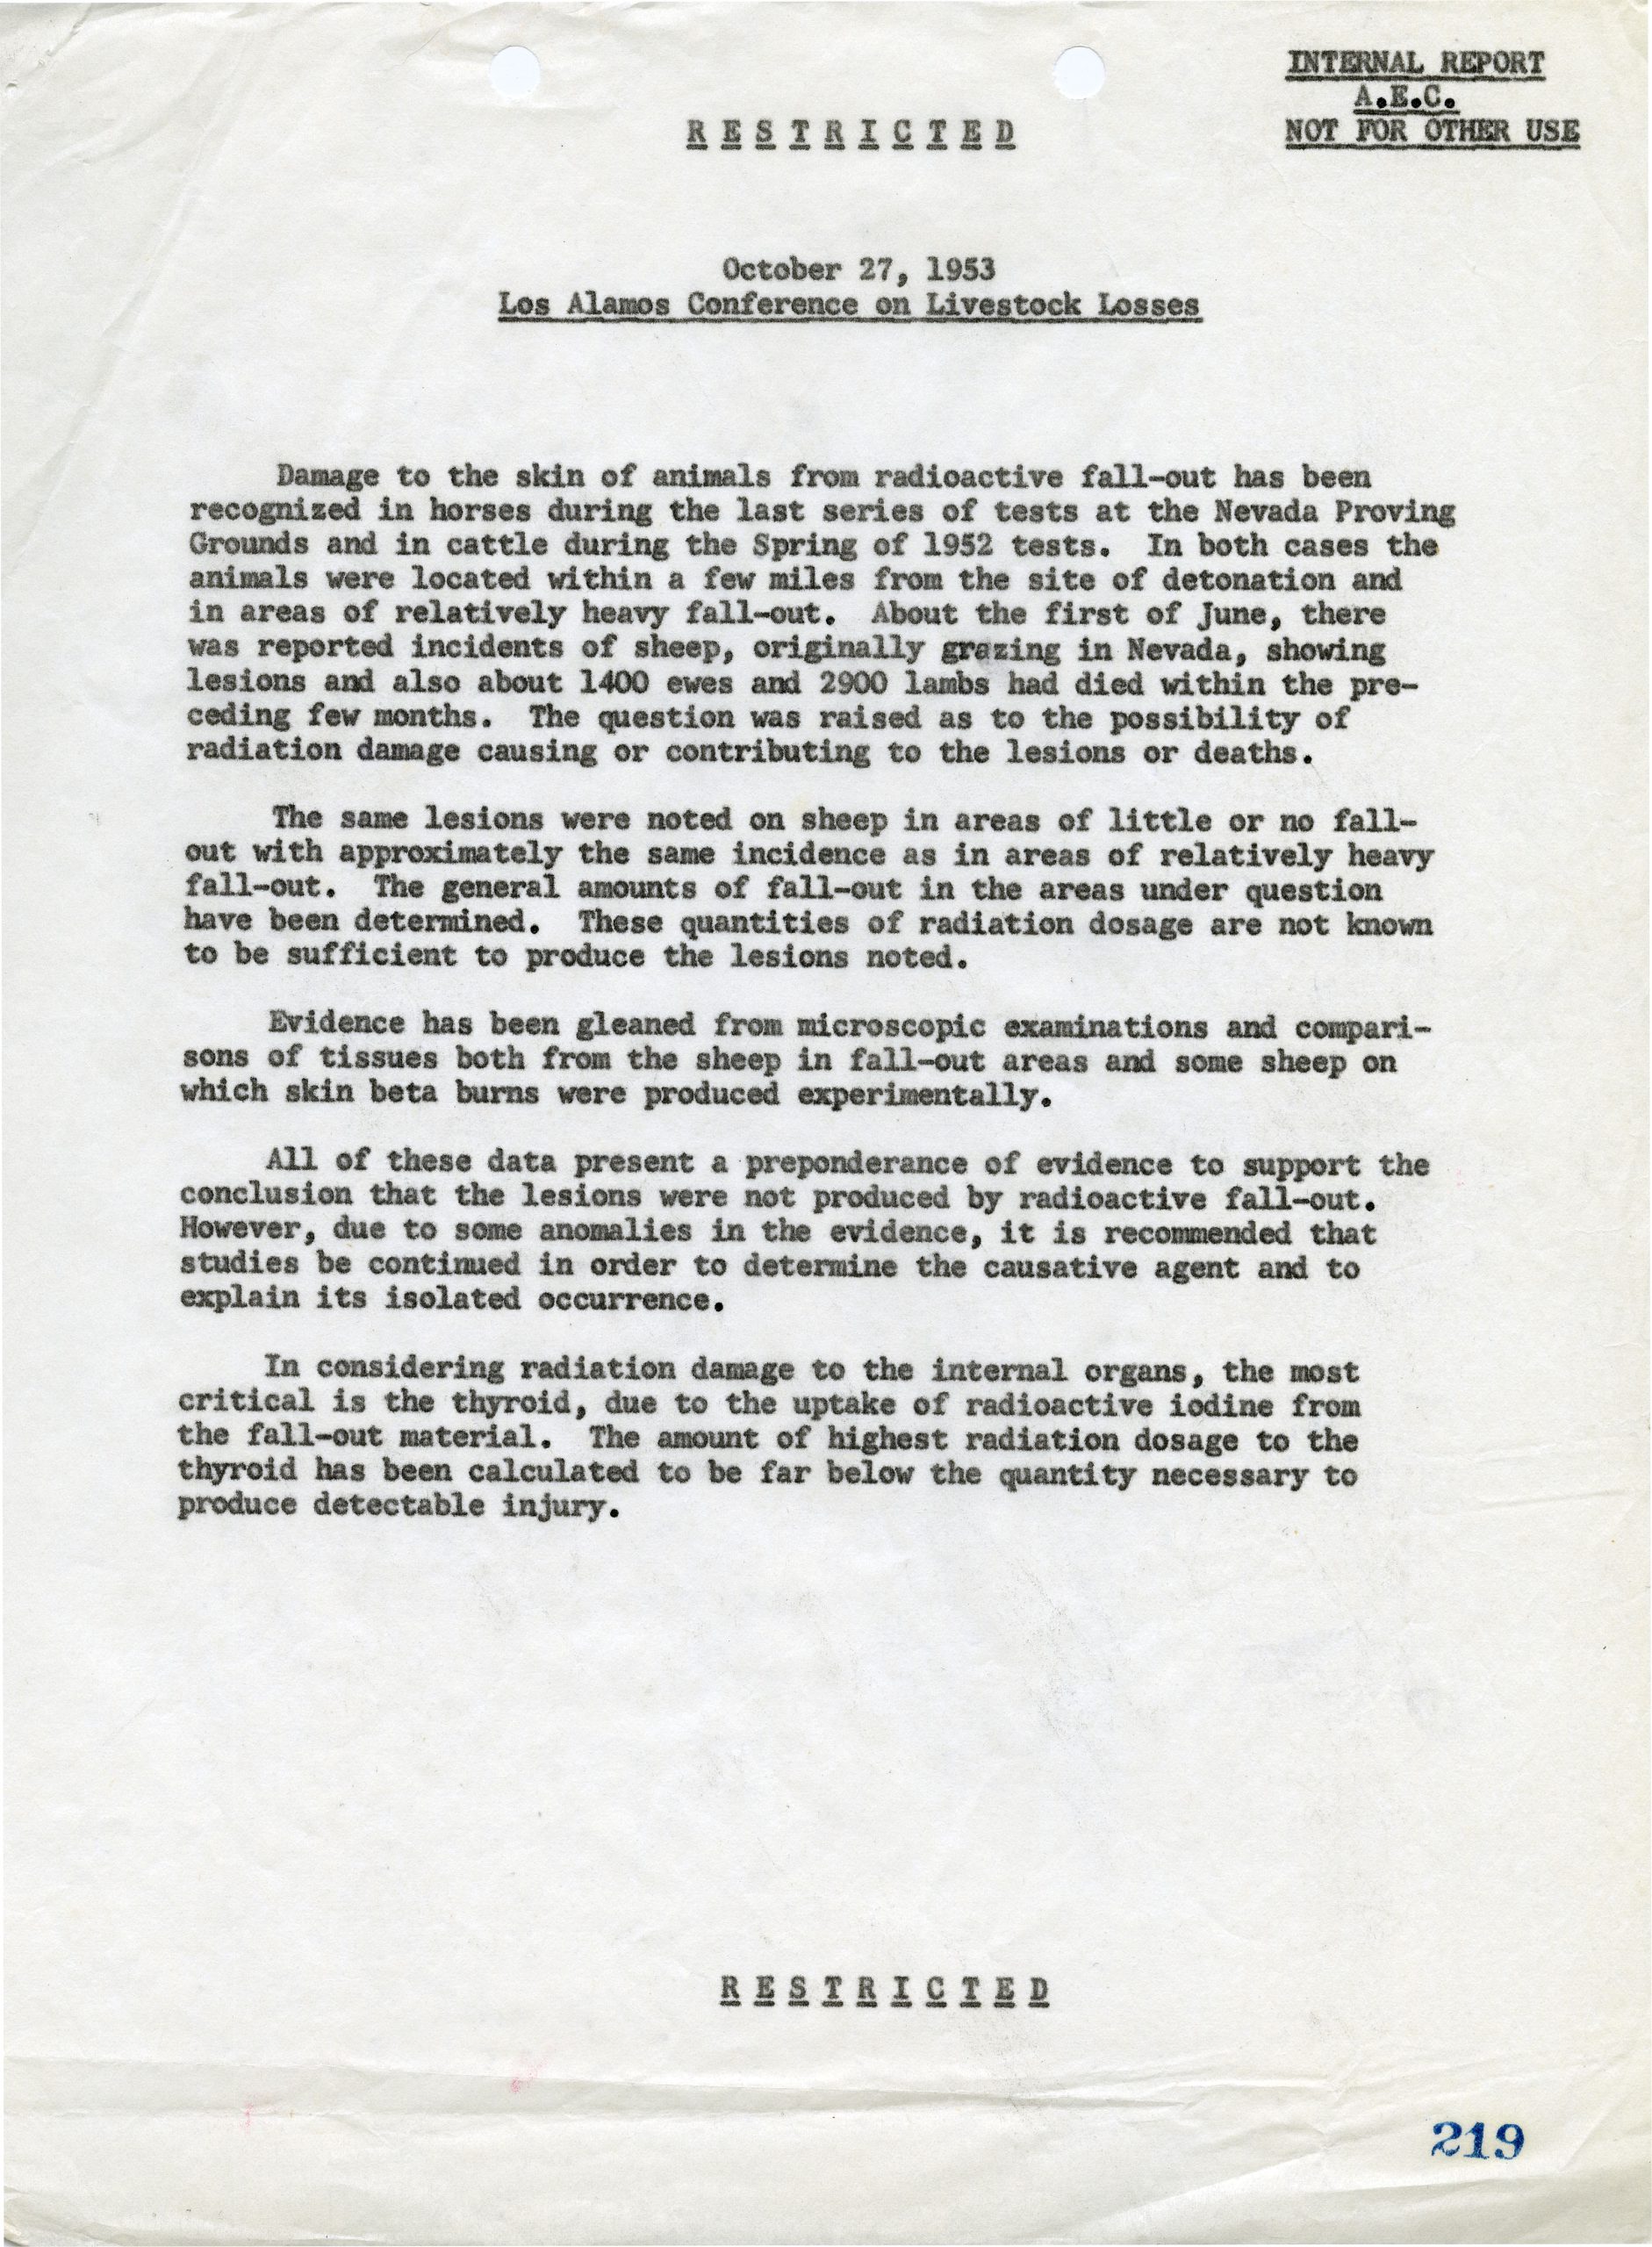 Report from October 1953 Los Alamos Conference on Livestock Losses (series 11571).